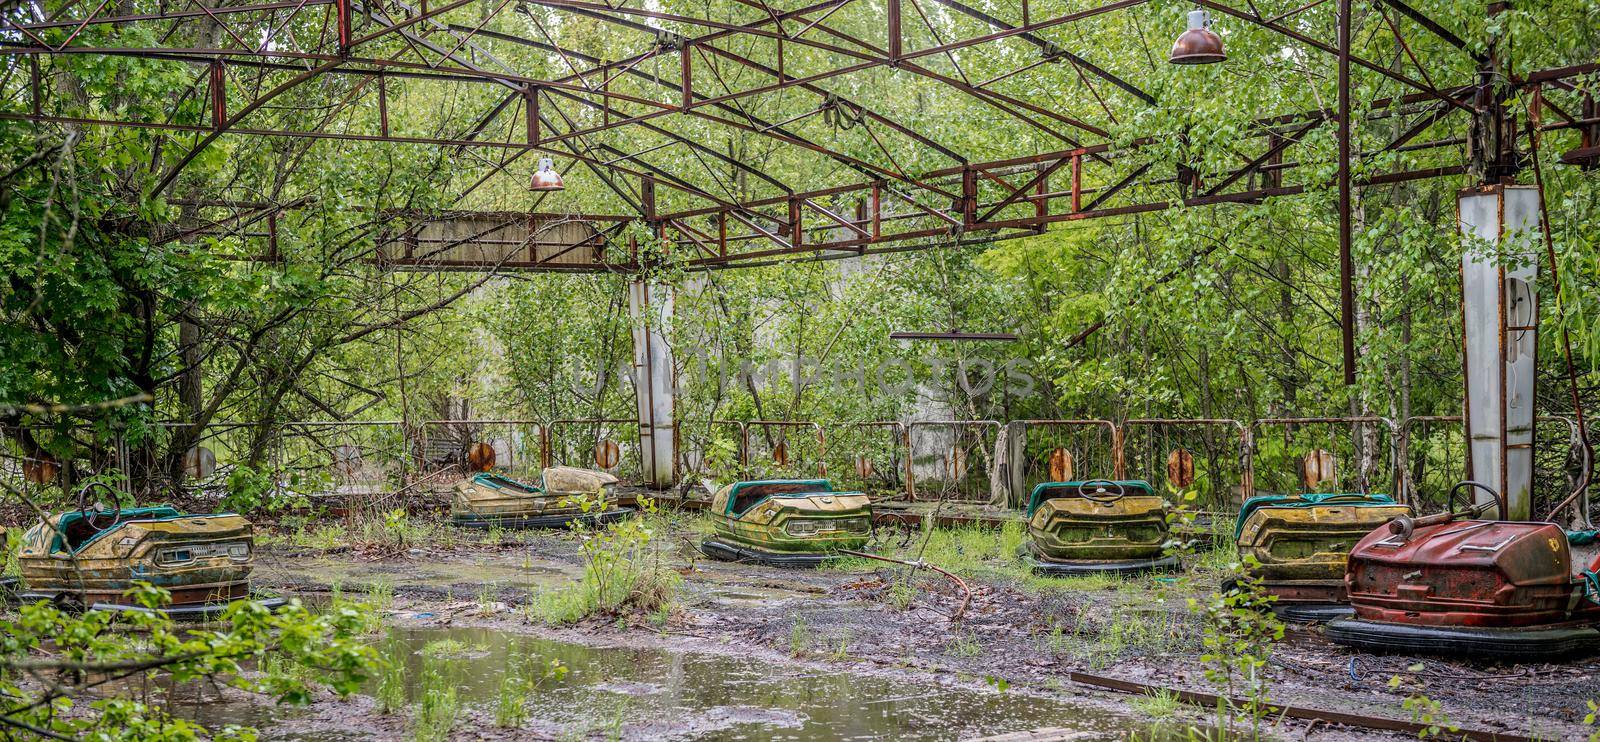 playground with cars in Pripyat park by tan4ikk1